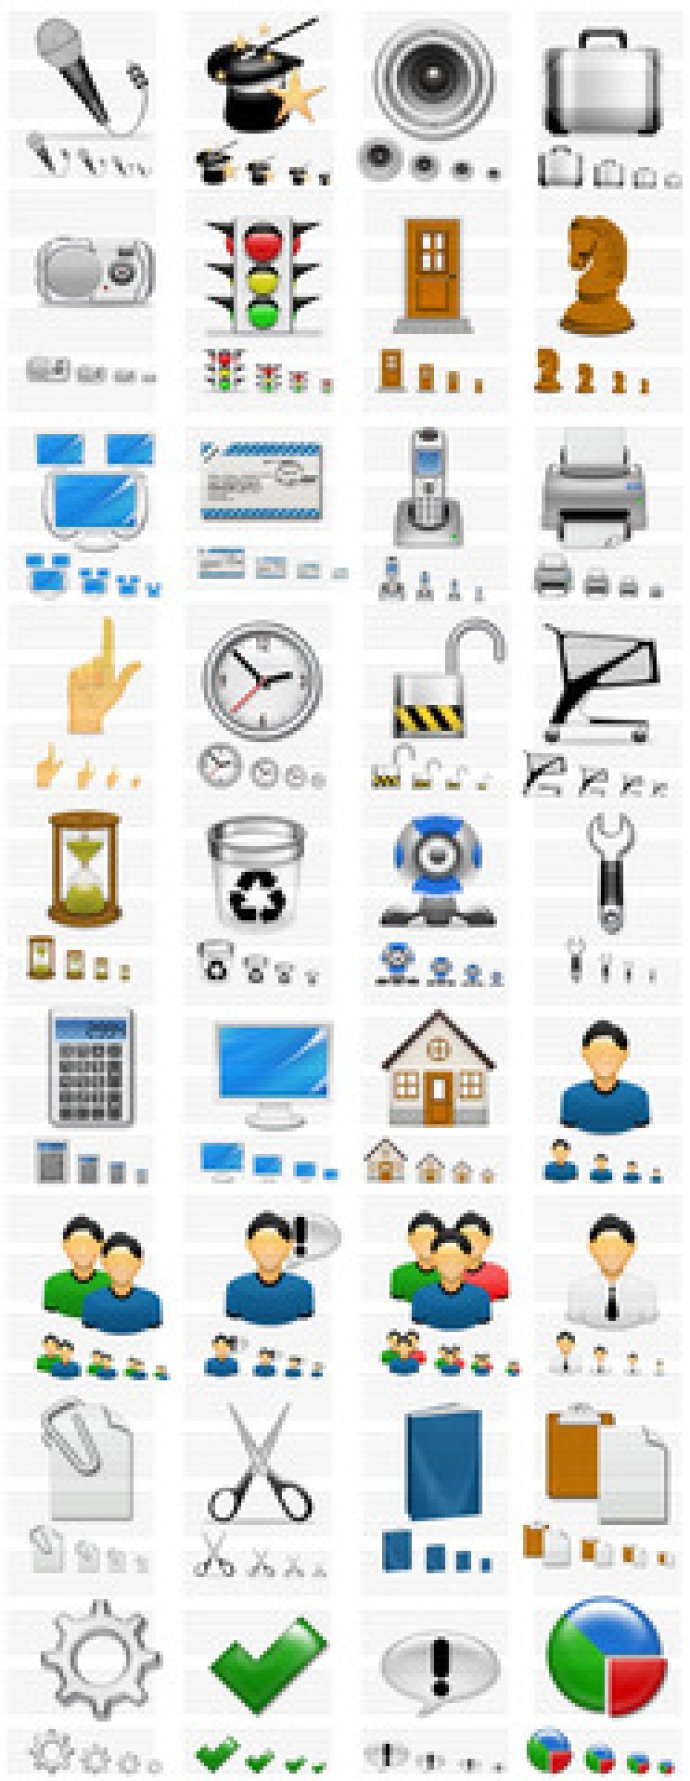 Iconshock Impressions - Professional icons for your software and web